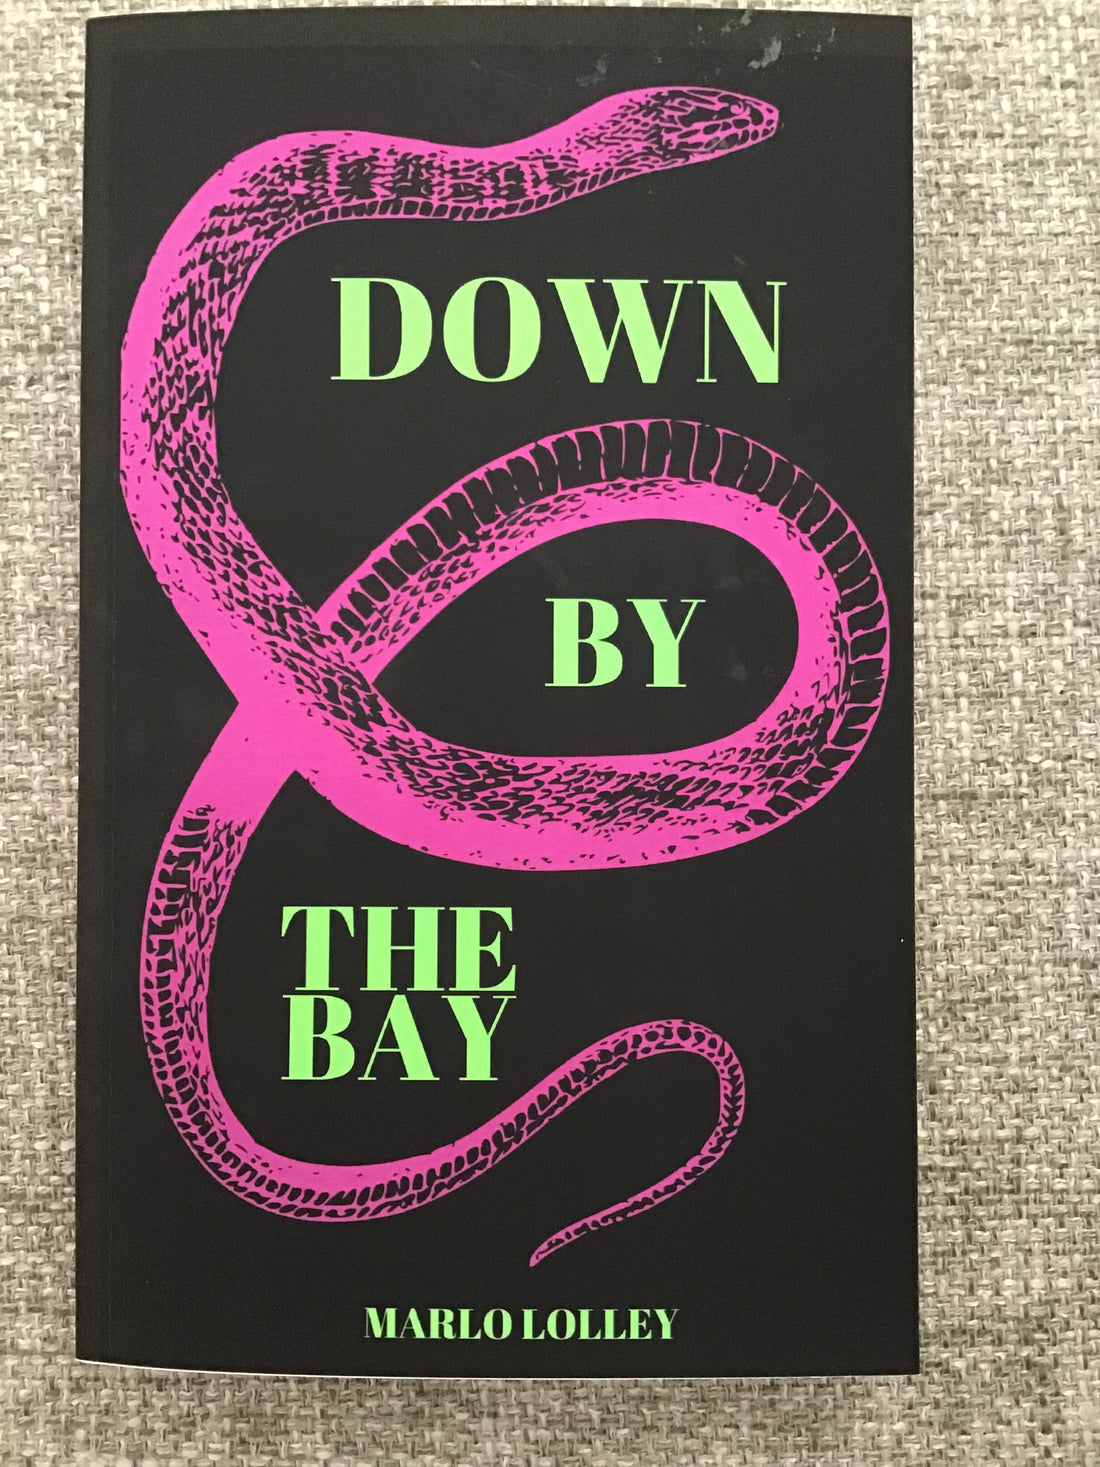 Down by the Bay by Marlo Lolley